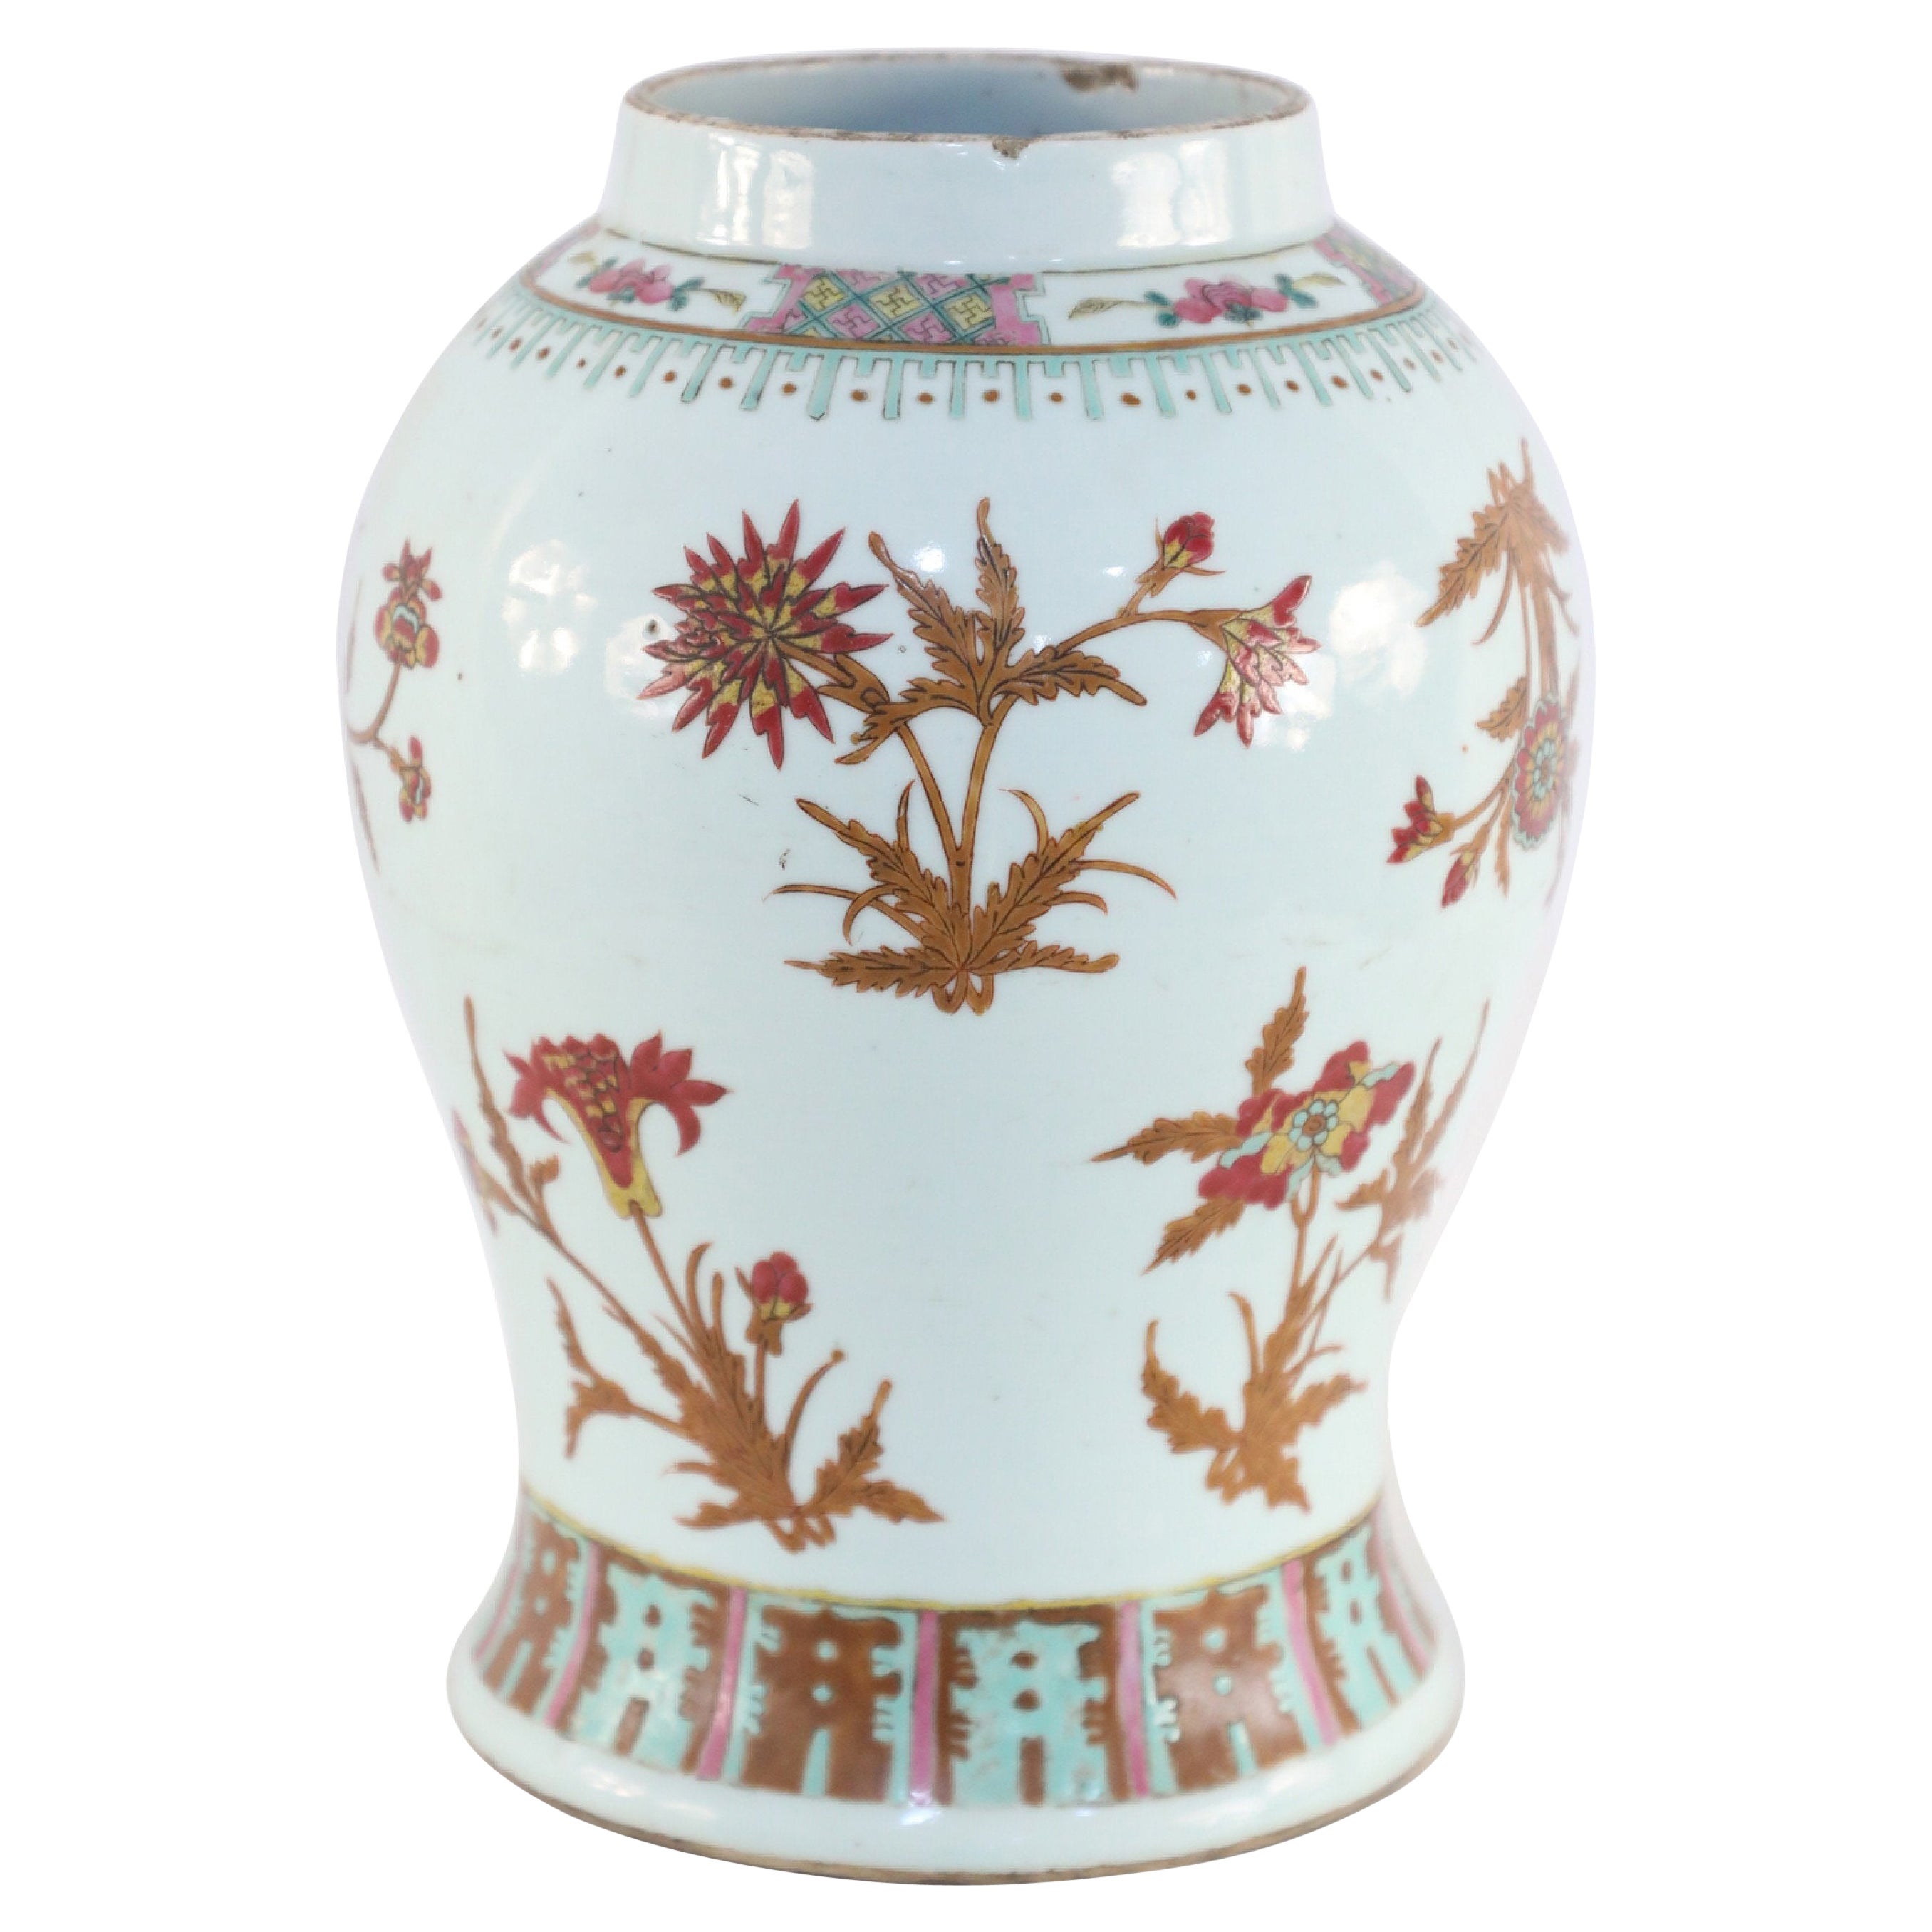 Chinese White, Brown, and Red Floral Design Porcelain Vase